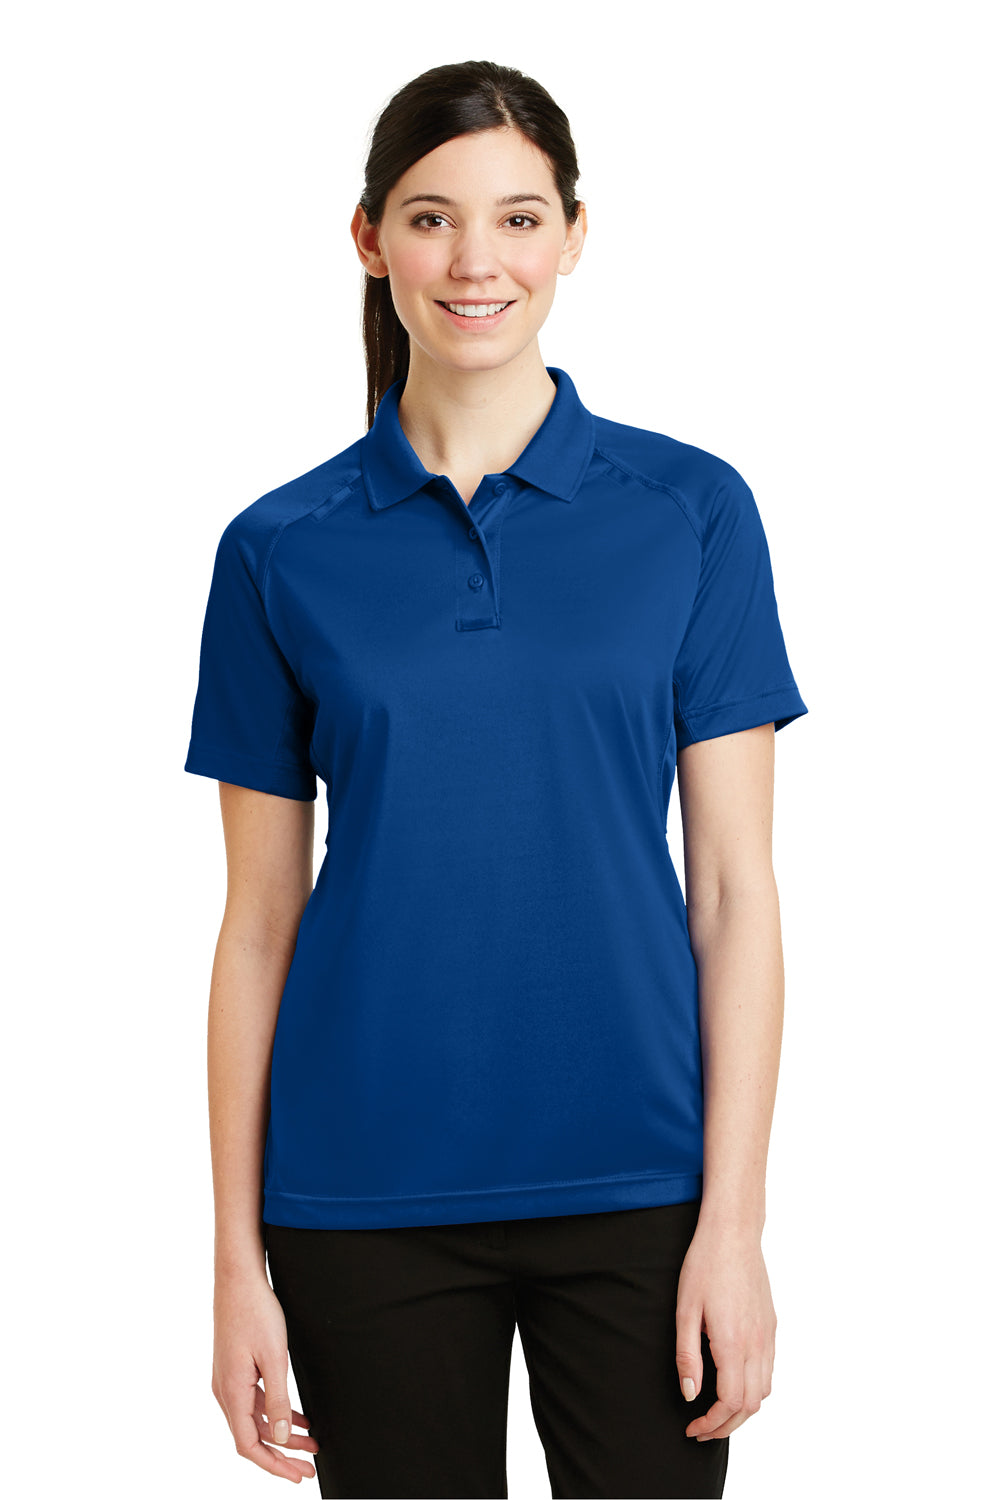 CornerStone CS411 Womens Select Tactical Moisture Wicking Short Sleeve Polo Shirt Royal Blue Front